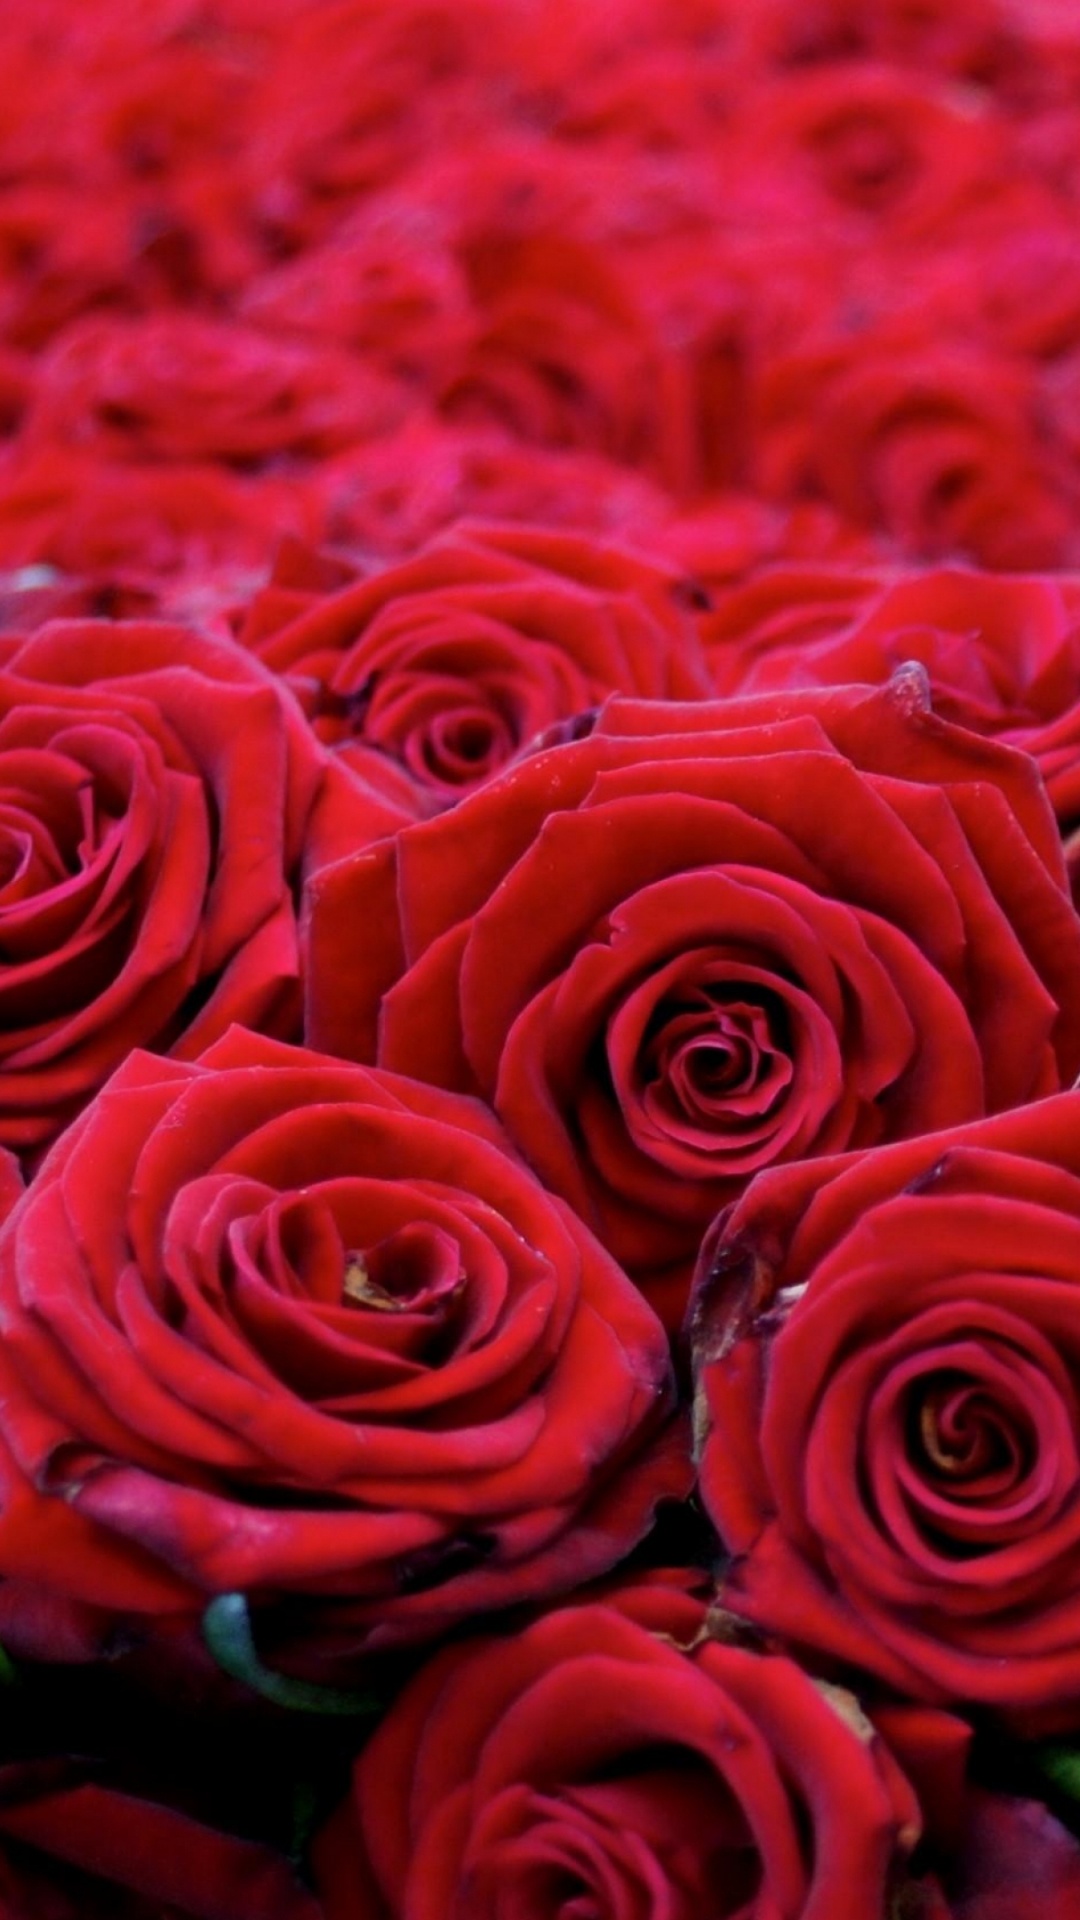 Red Roses on Red Textile. Wallpaper in 1080x1920 Resolution